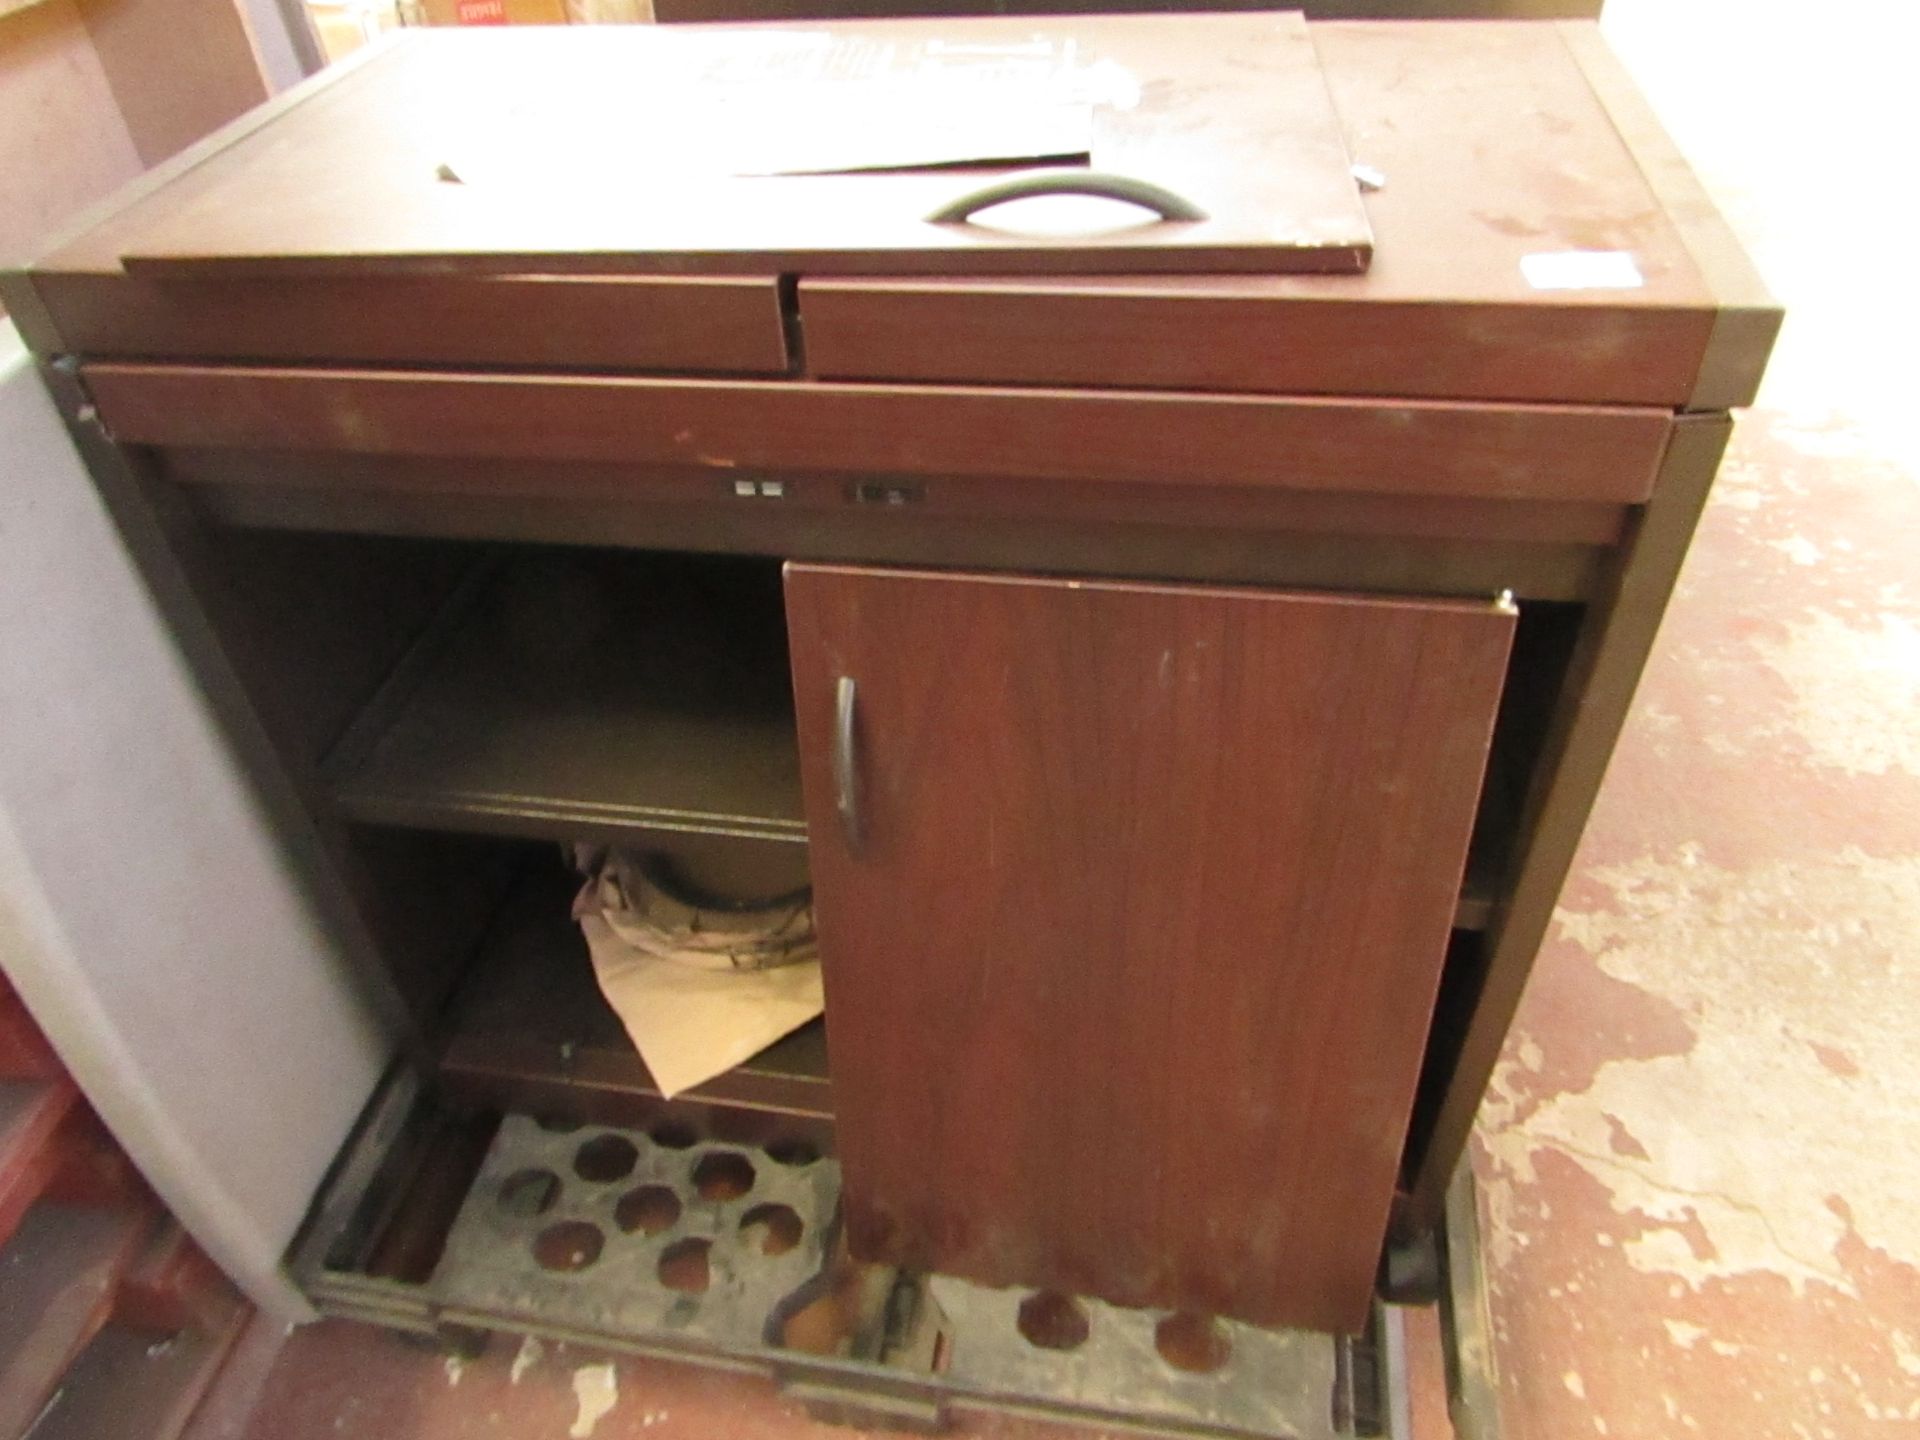 Hostess Buffet server trolley with heated top, heats up but is slightly damaged and missing screws